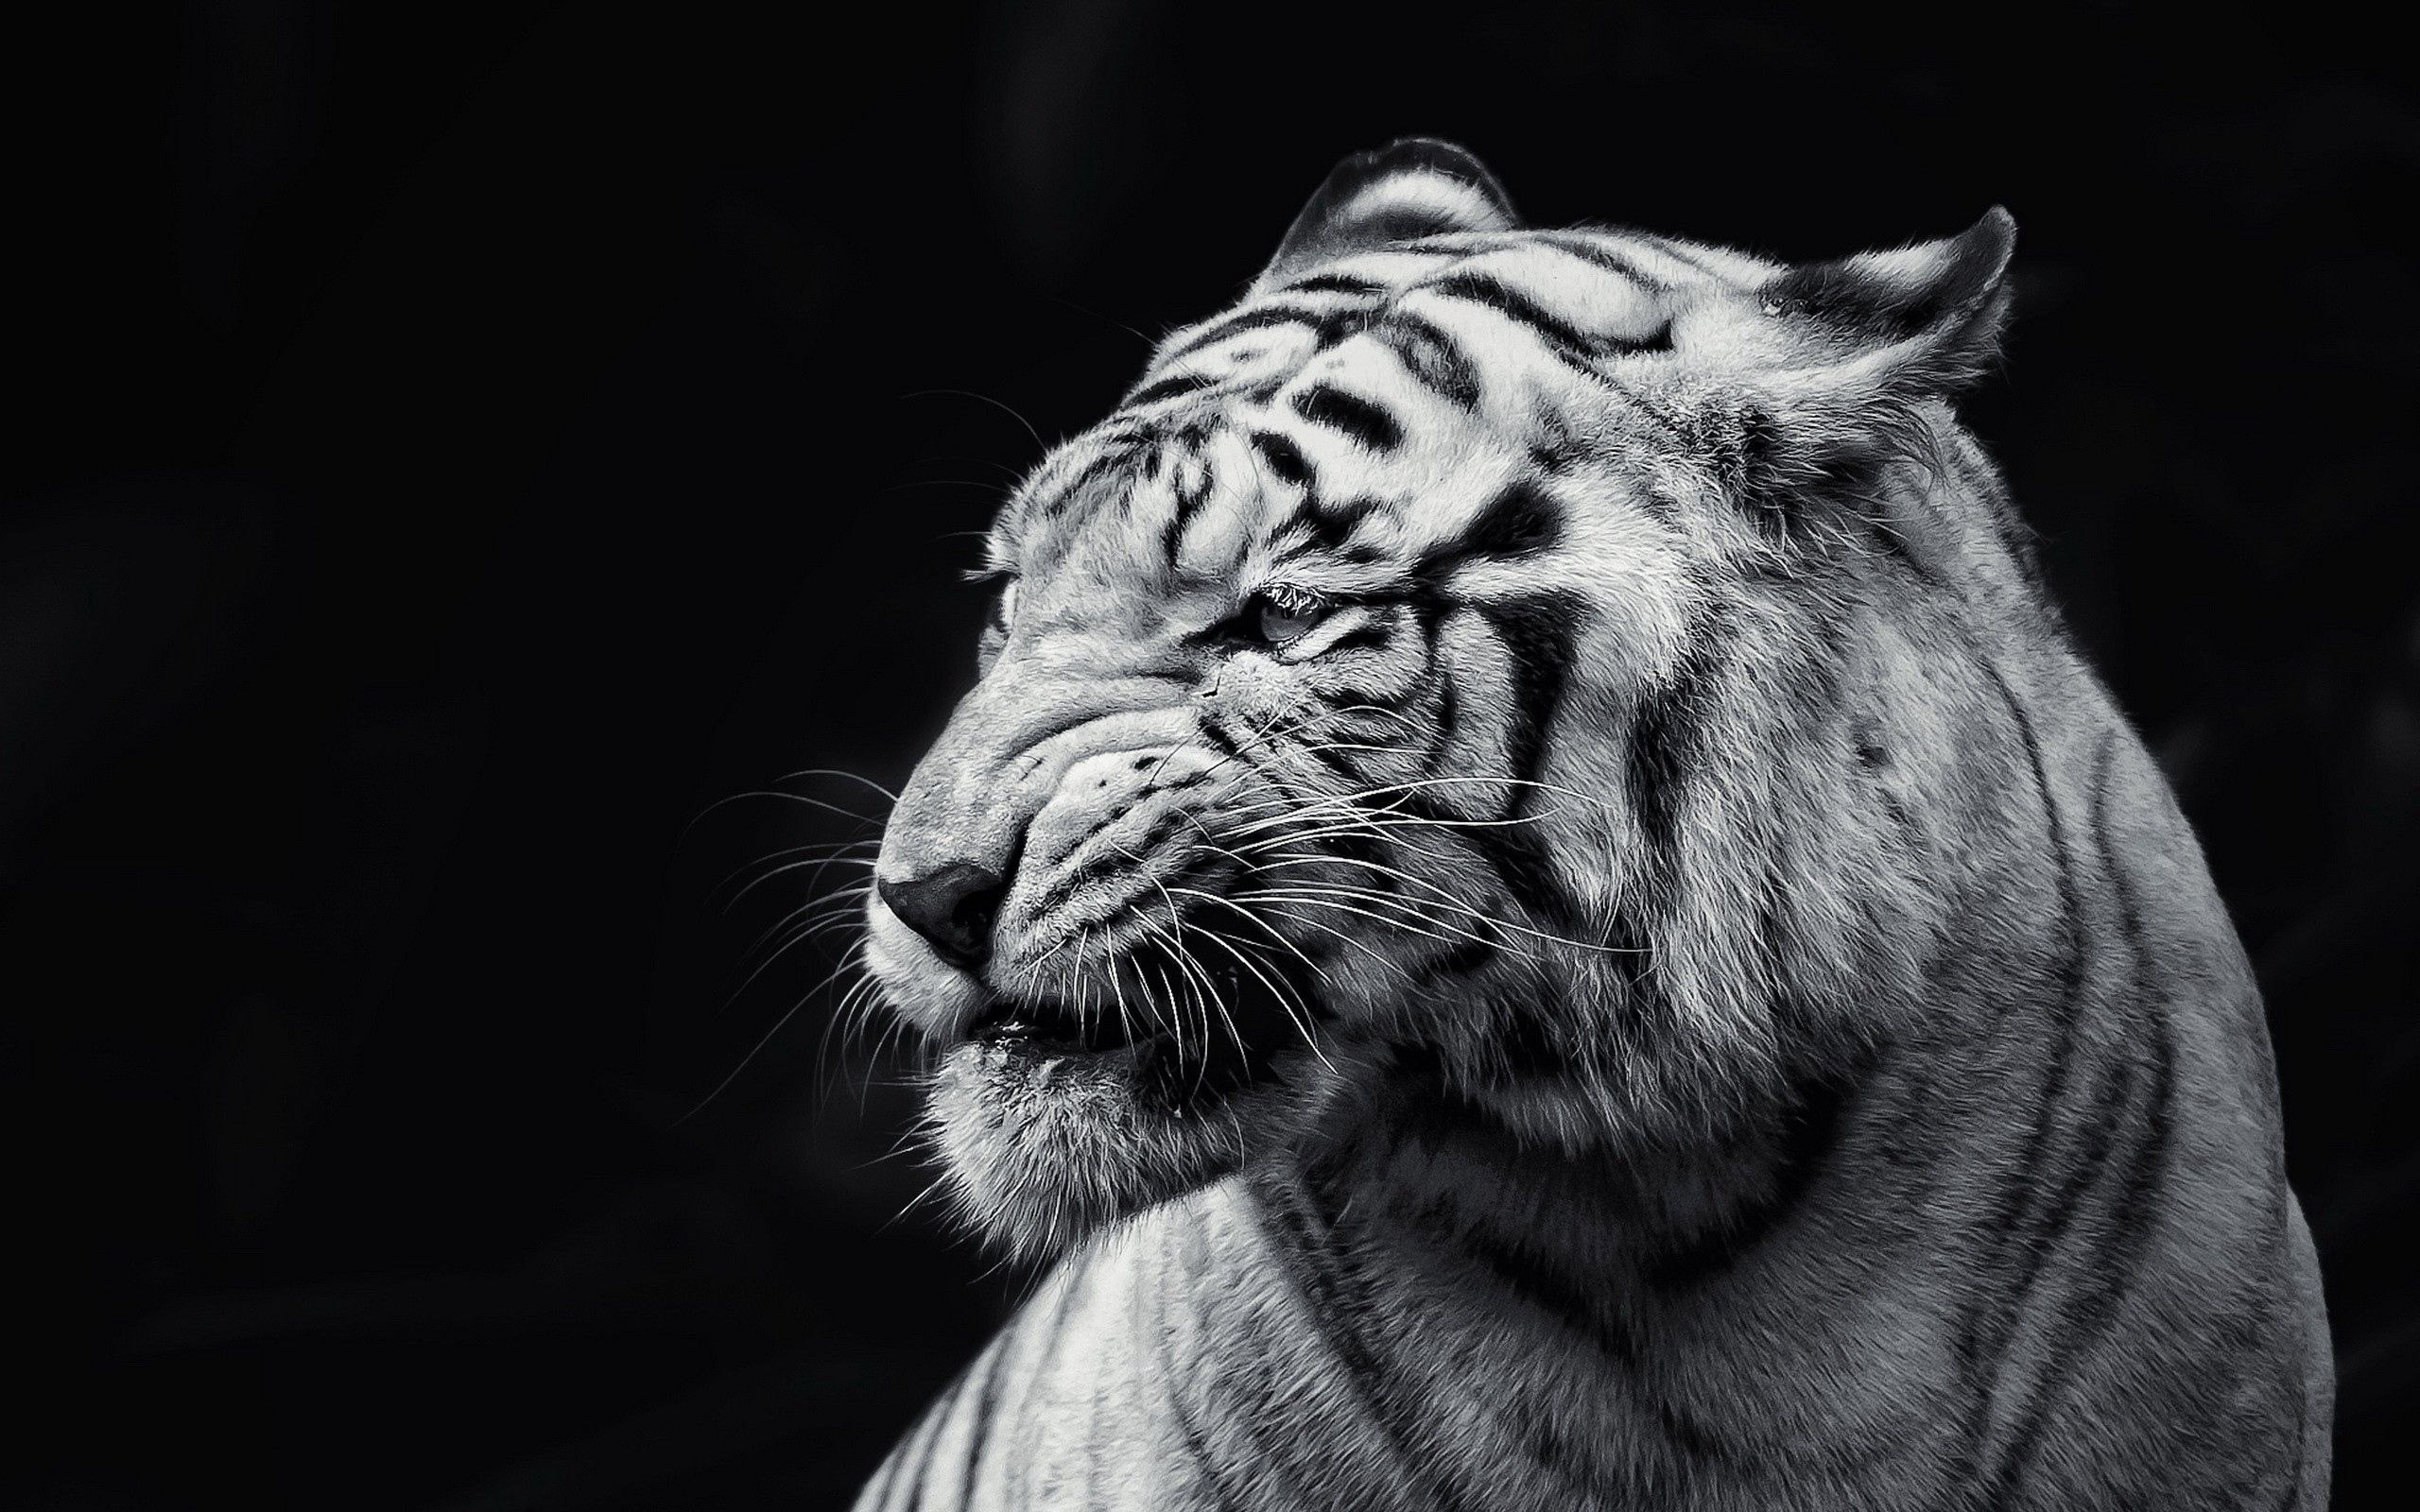 148906 download wallpaper bw, animals, muzzle, sight, opinion, chb, tiger screensavers and pictures for free